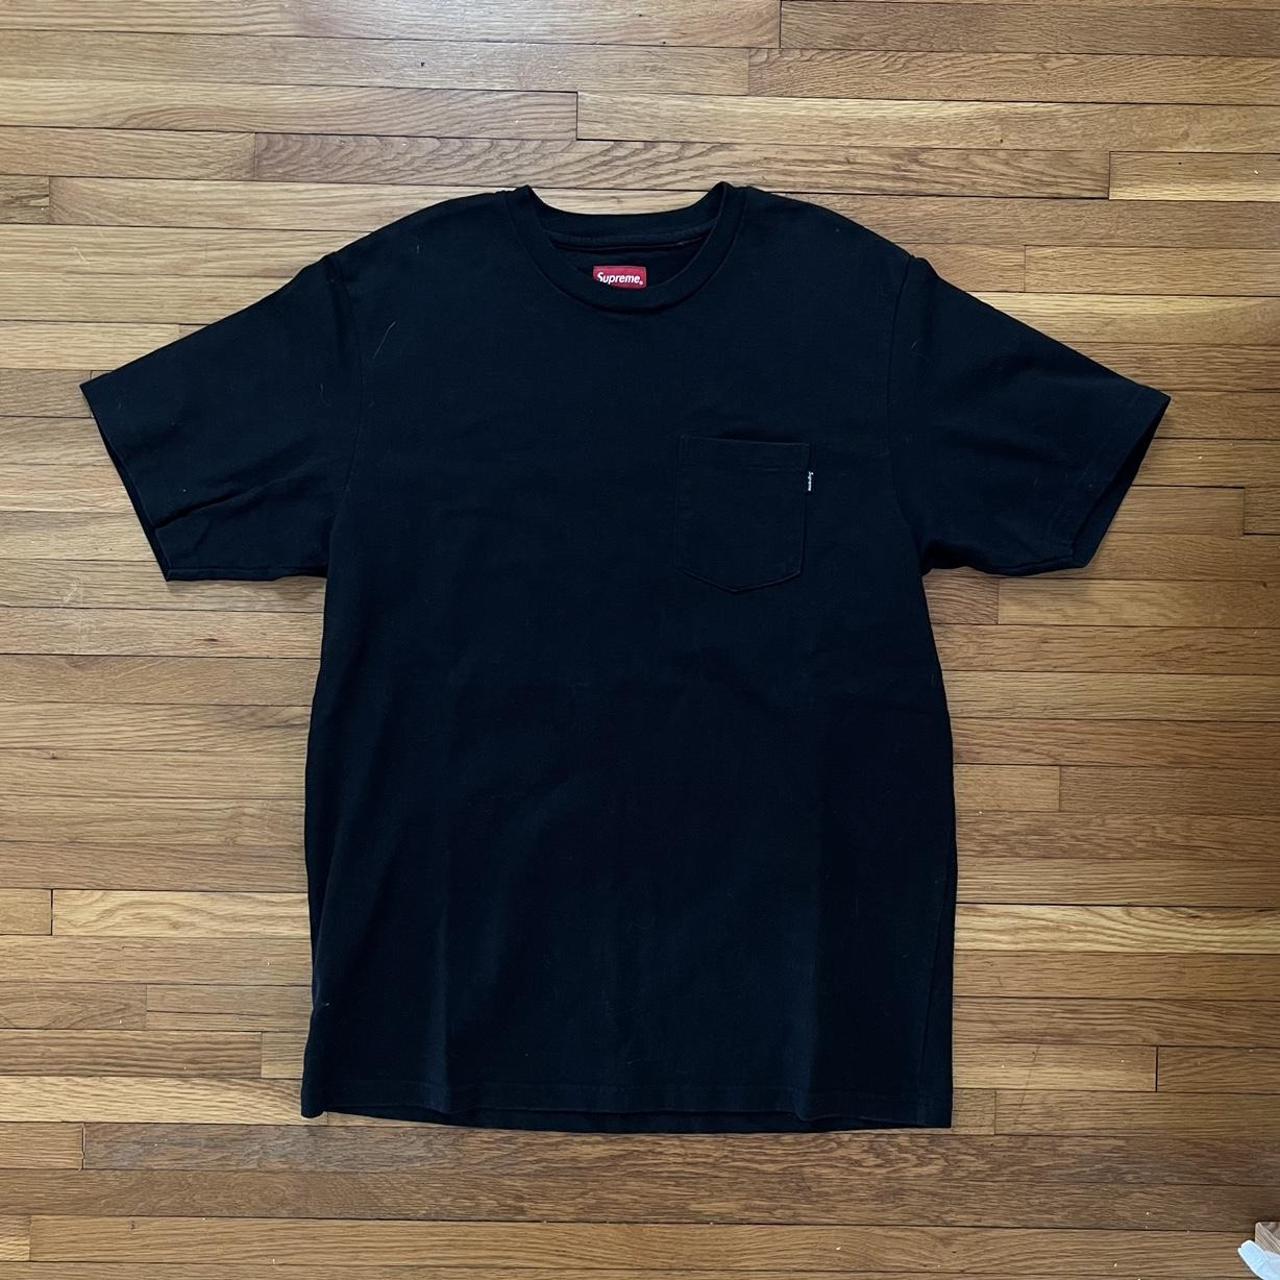 Supreme S/S Pocket Tee from 2019 🎱 Heavyweight... - Depop